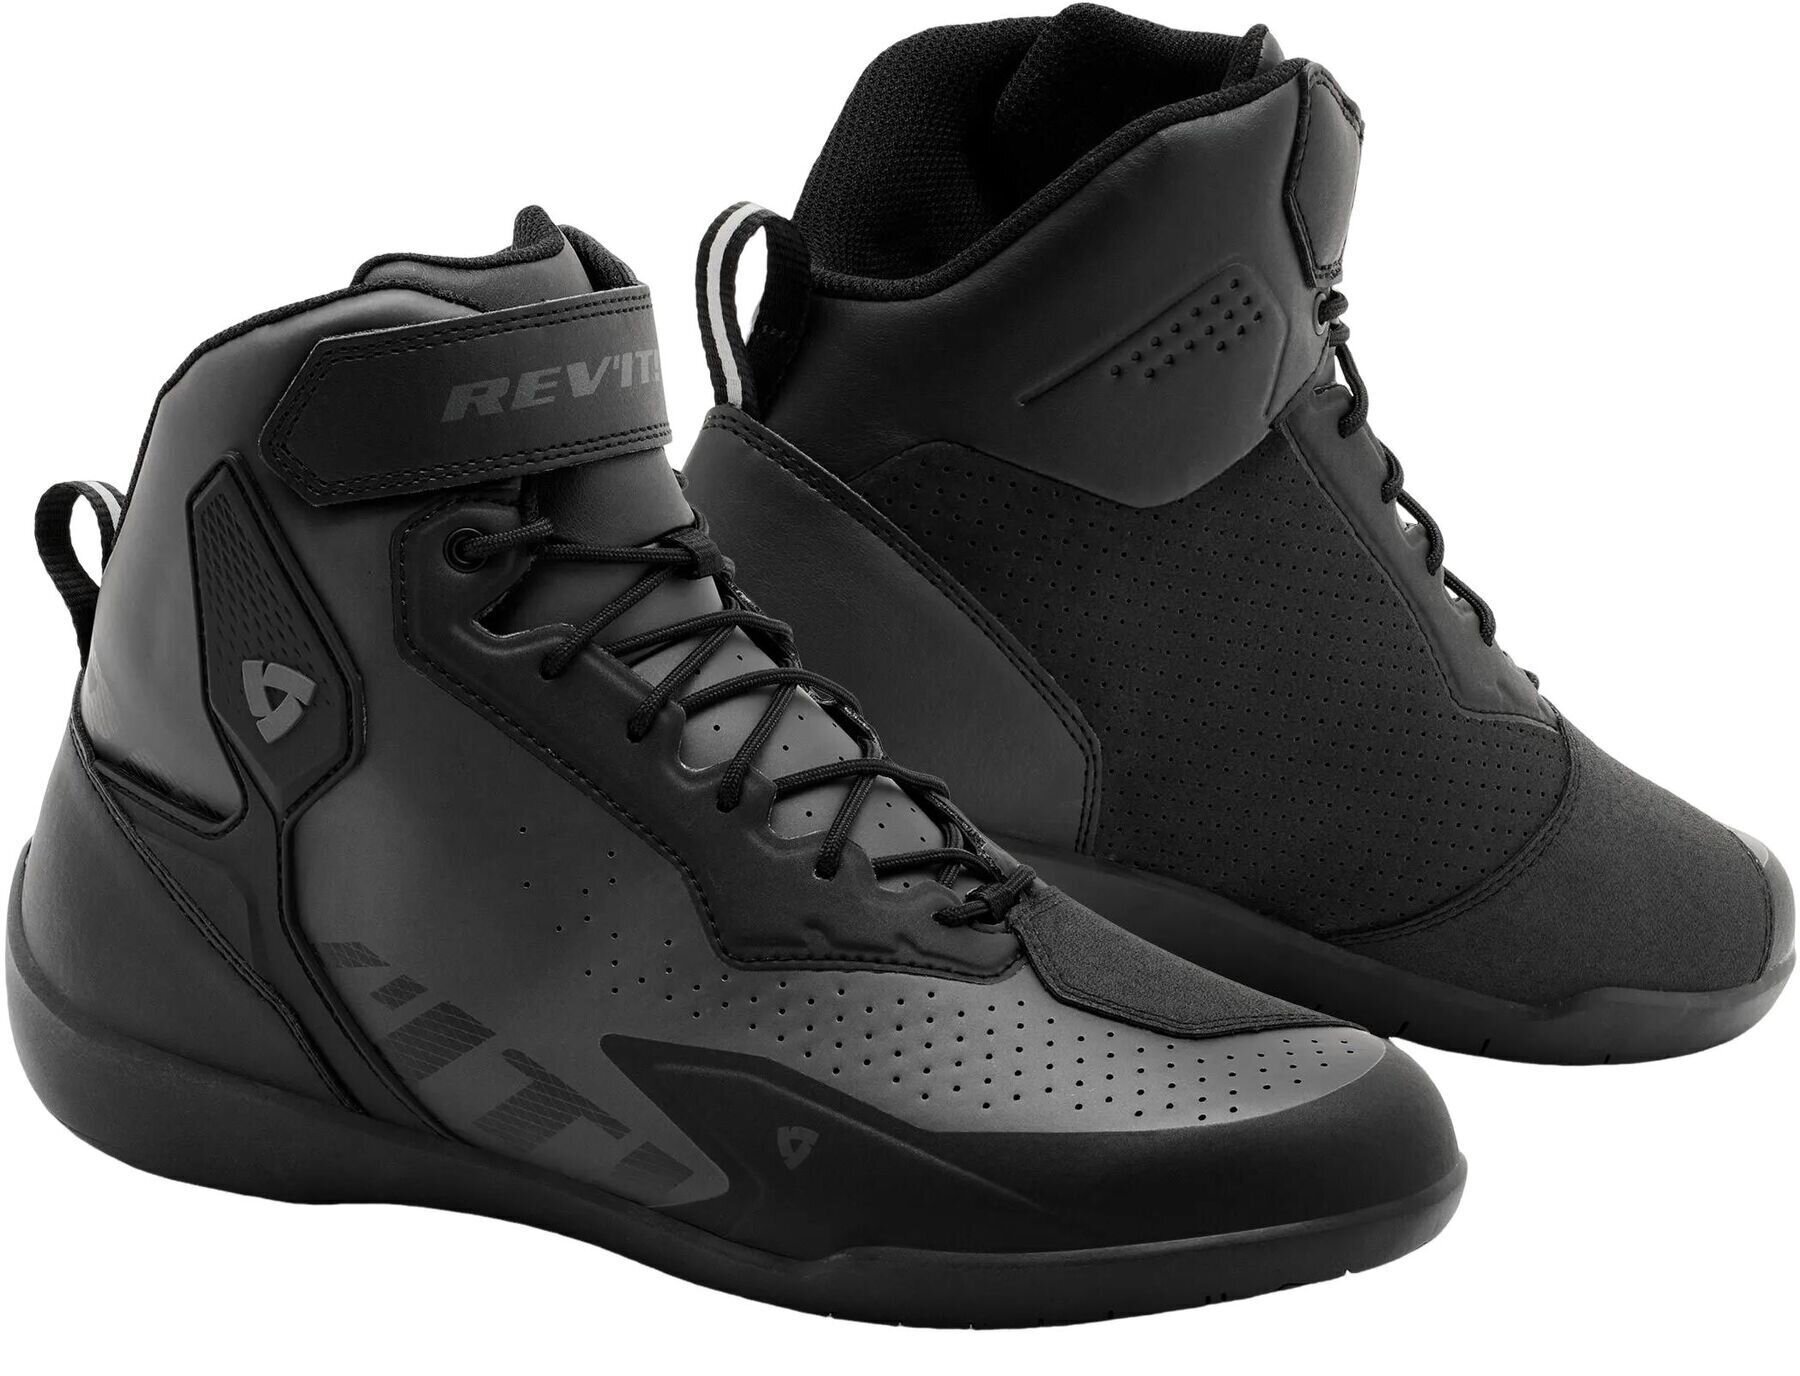 Boty Rev'it! Shoes G-Force 2 Black/Anthracite 45 Boty